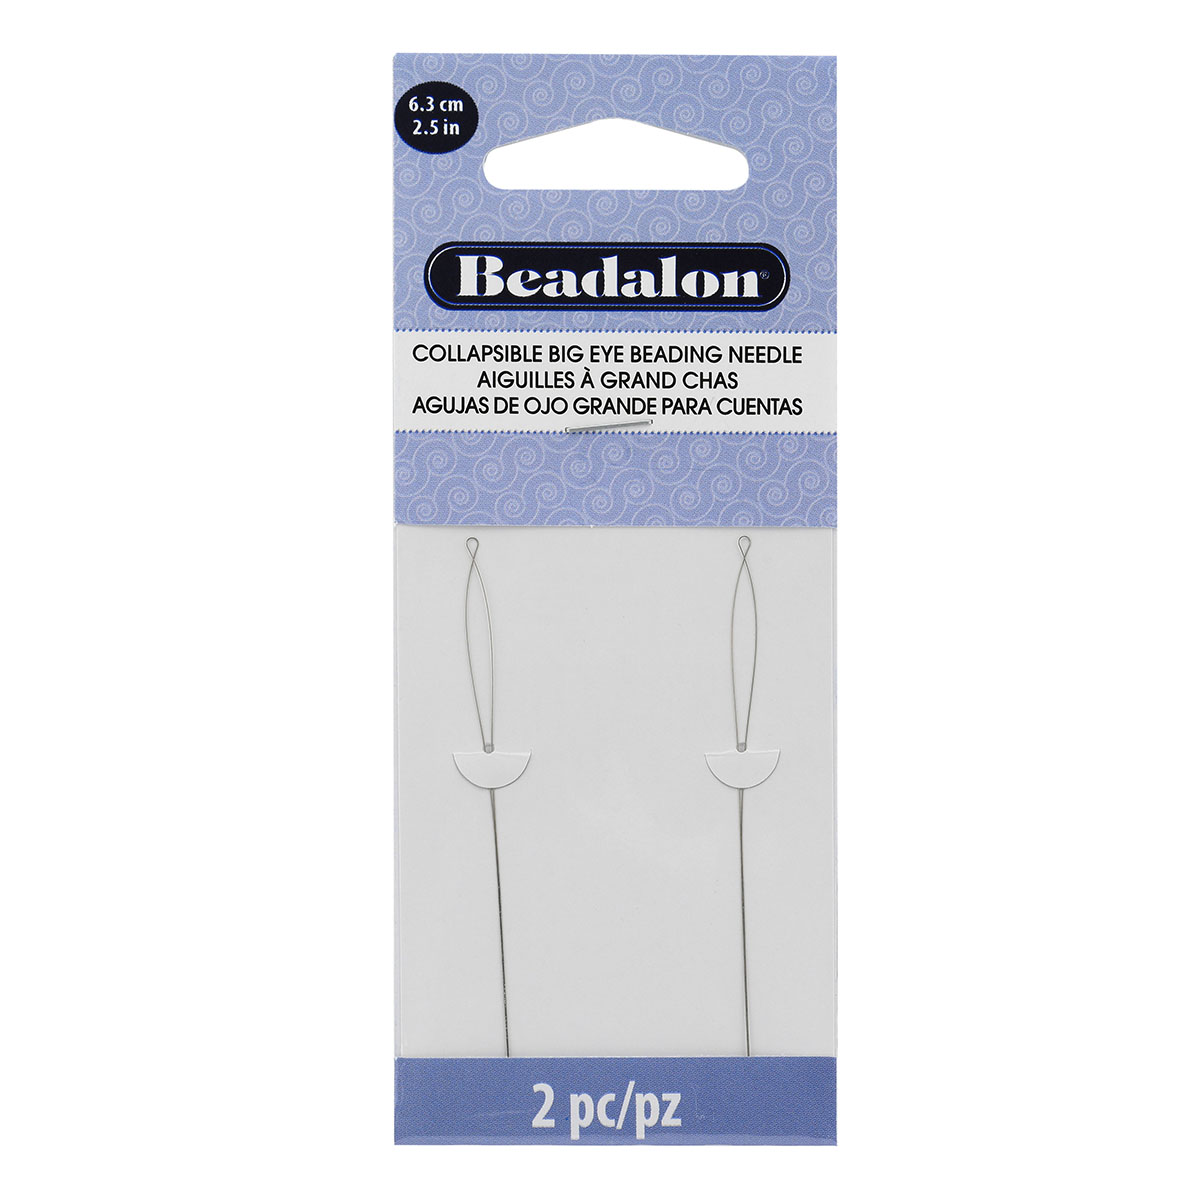 Collapsible Big Eye Beading Needles, 0.54 mm (.009 in), 6.35 cm (2.5 in), 2  pc